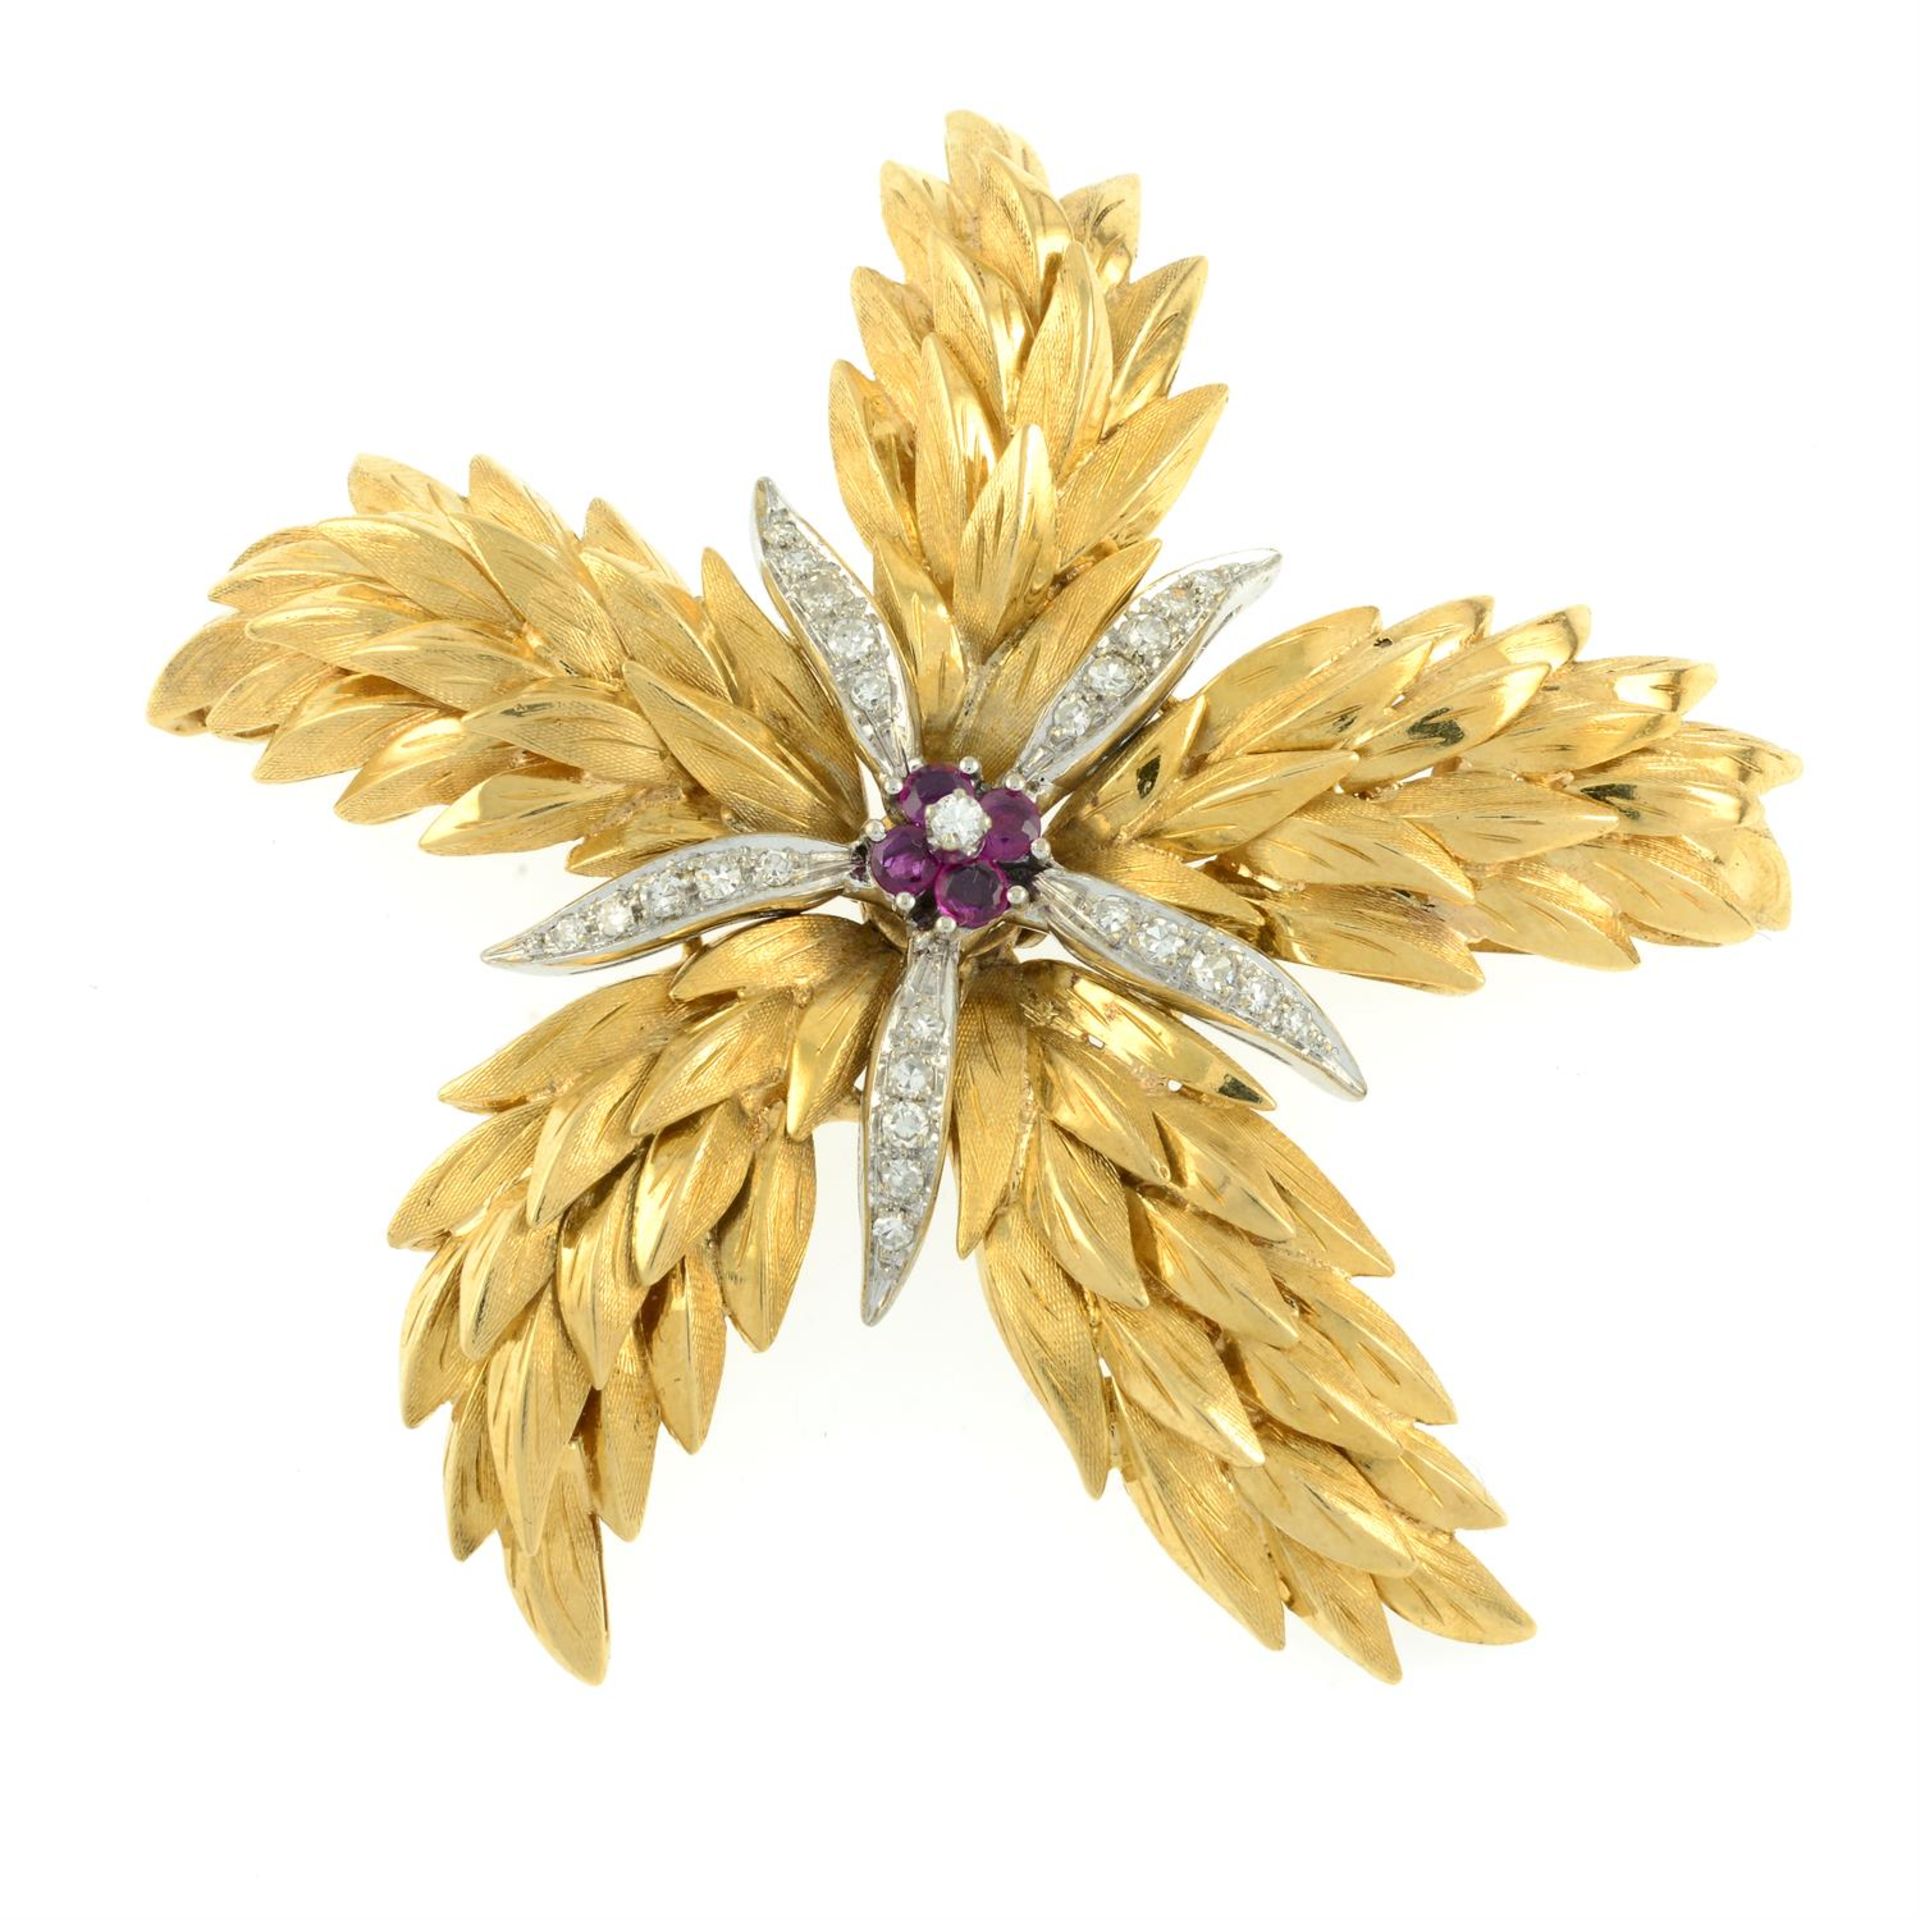 A mid 20th century 18ct gold brilliant-cut diamond and ruby floral brooch/pendant, by Tiffany & Co. - Image 2 of 4